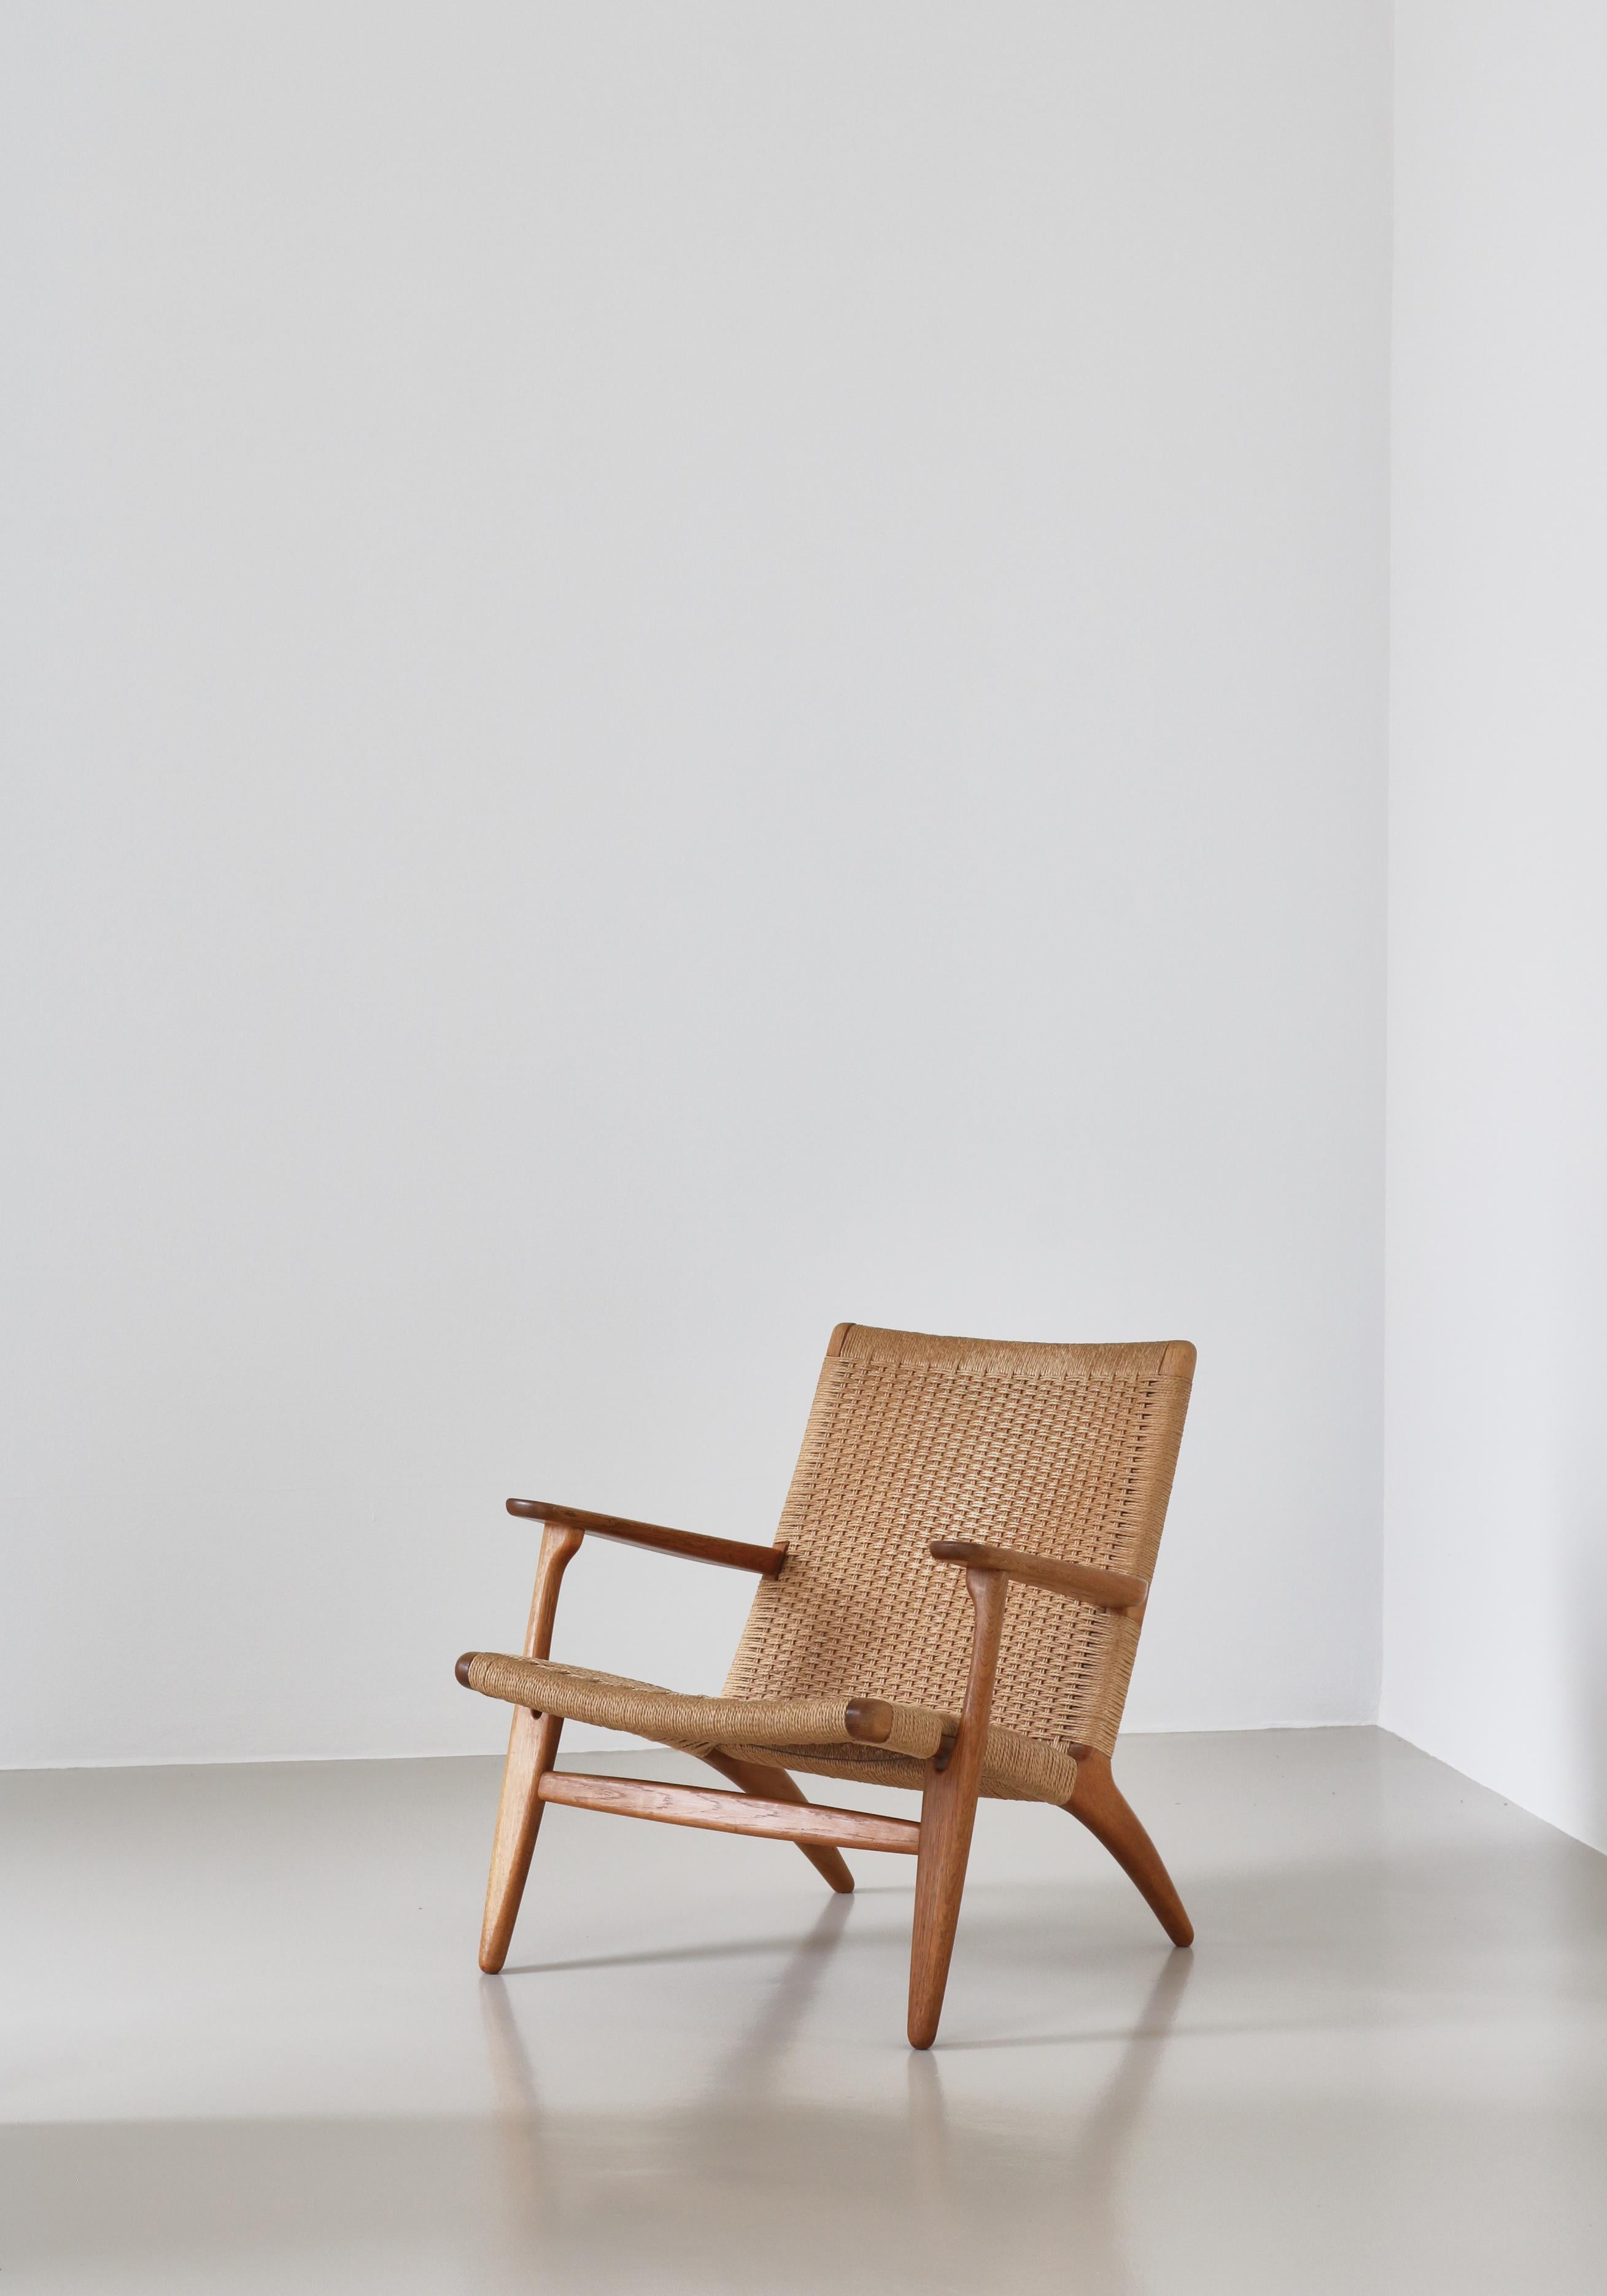 Papercord Hans J. Wegner Early Production Lounge Chair model CH25, Denmark, 1950s